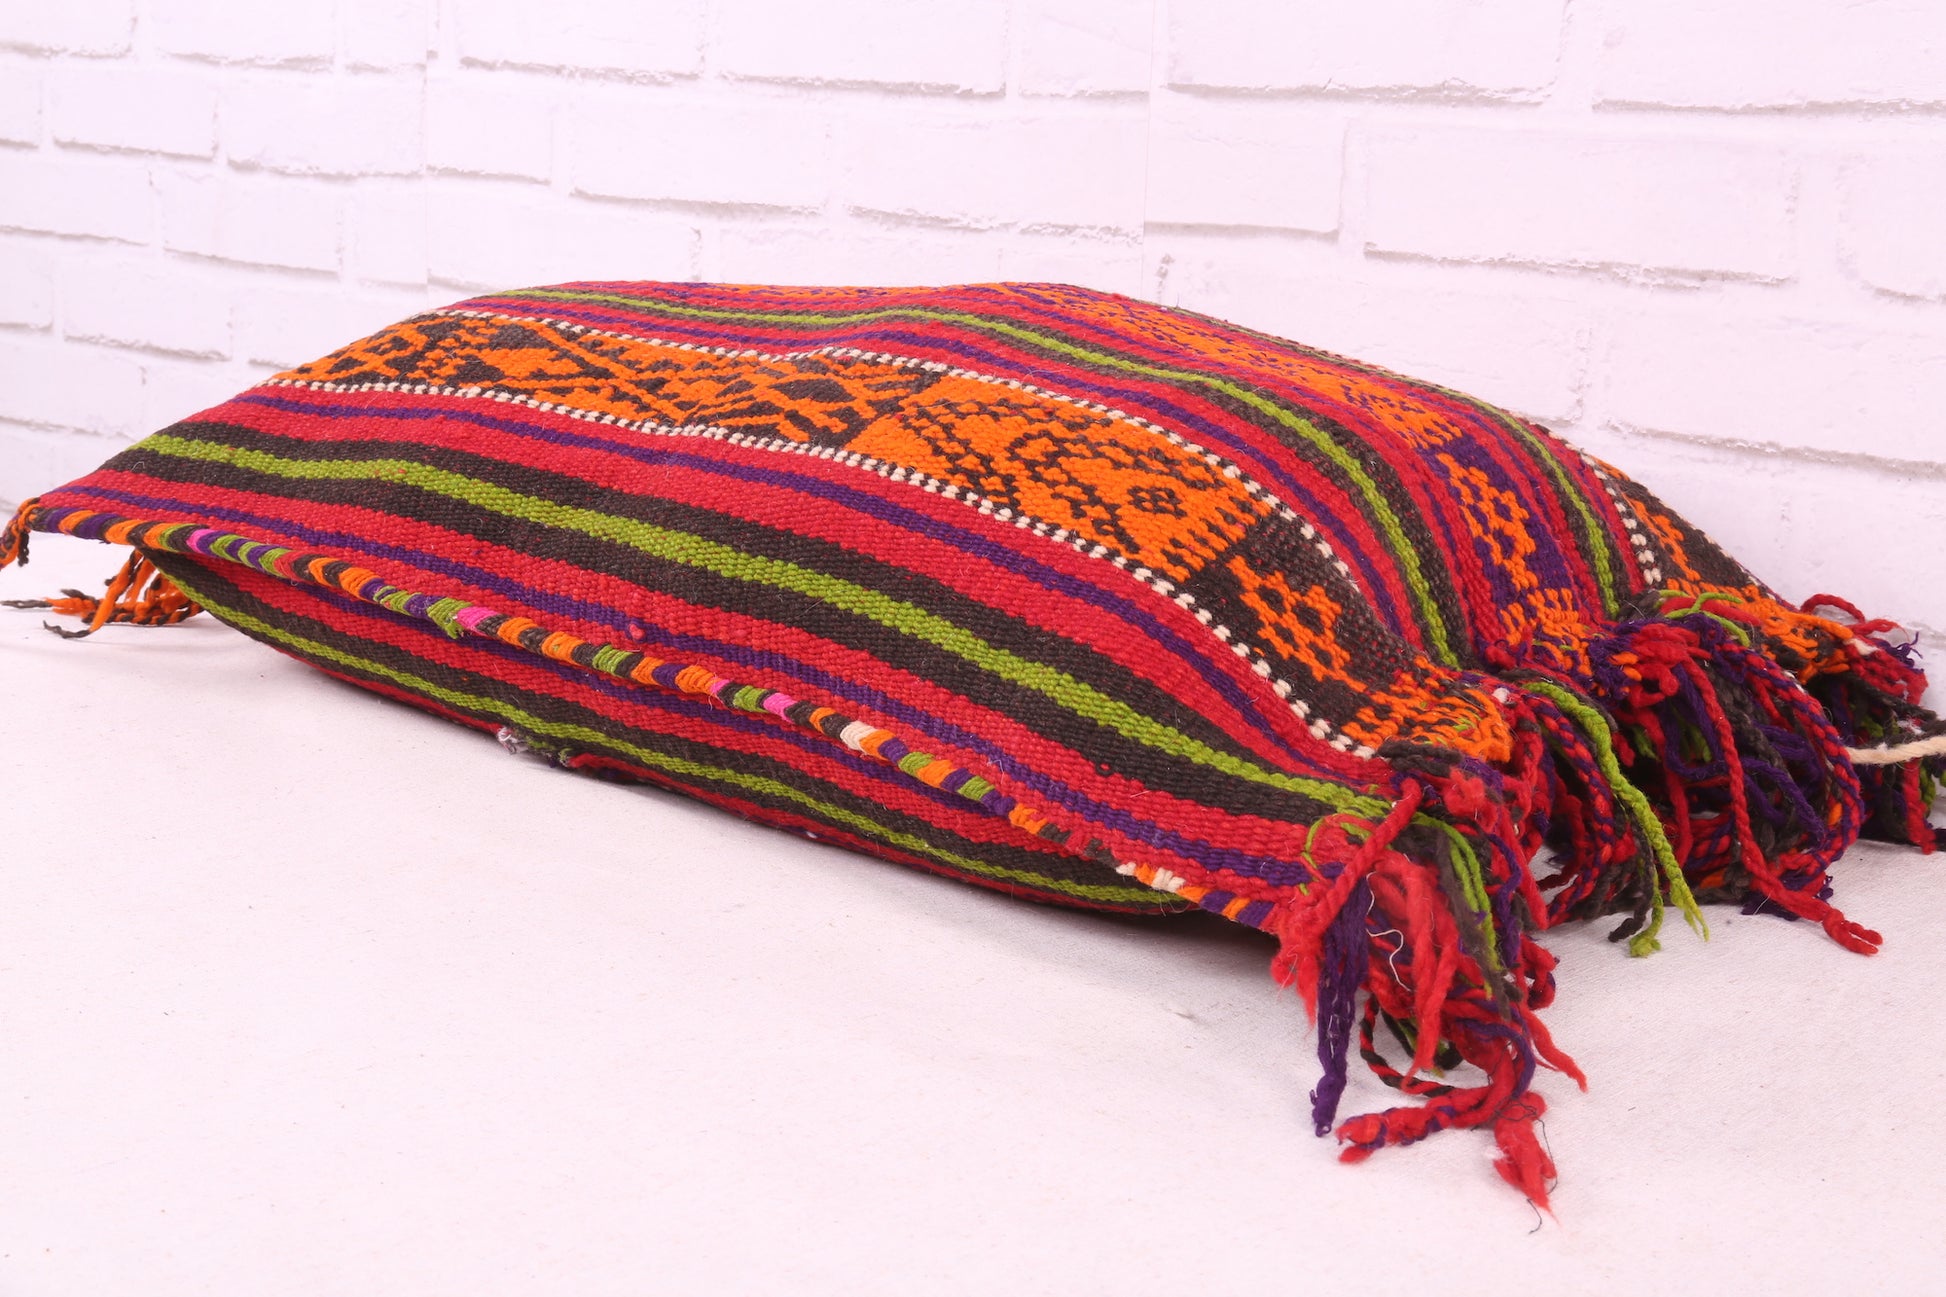 Red Moroccan Bohemian pillow 17.7 inches X 25.9 inches